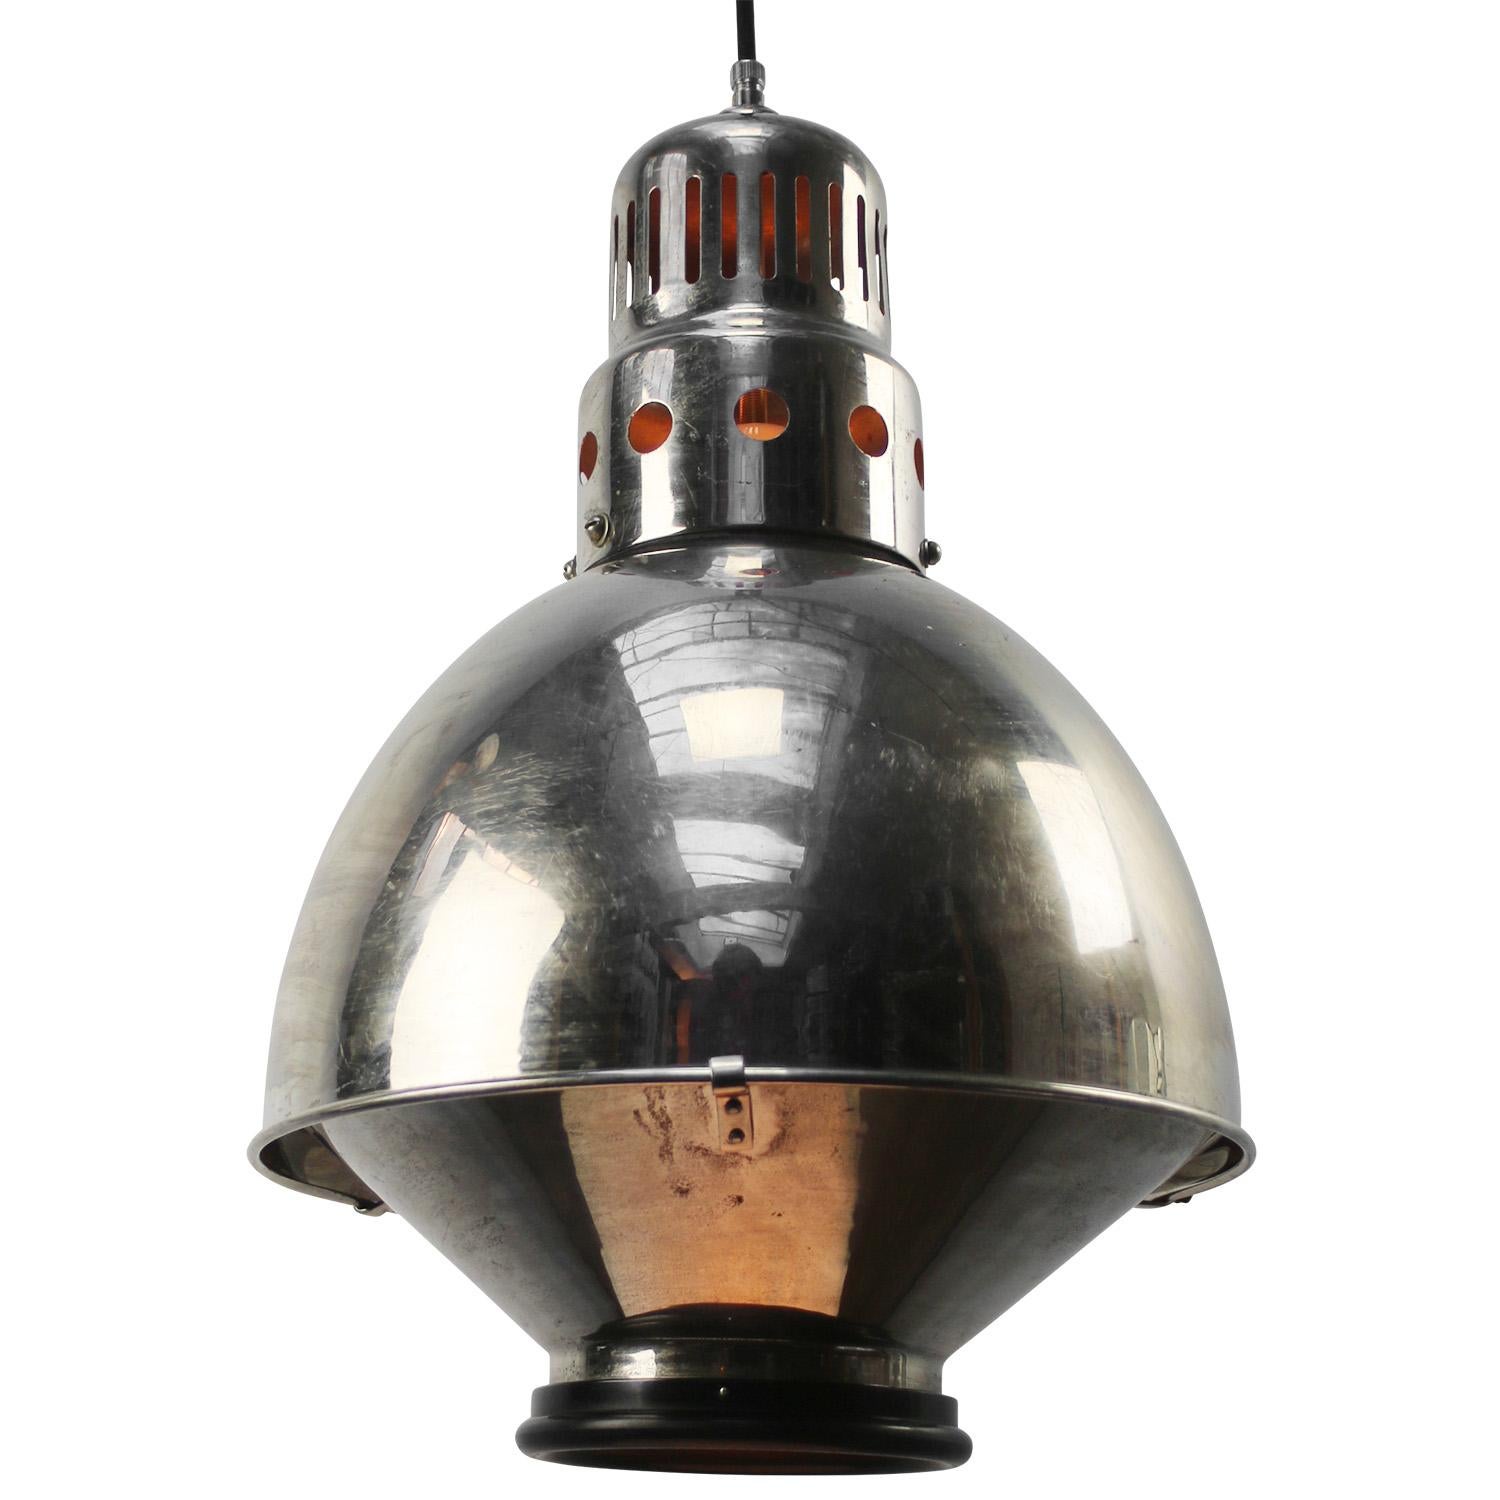 French vintage medical pendant lamp
Chrome / metal shade

Weight 2.60 kg / 5.7 lb

Priced per individual item. All lamps have been made suitable by international standards for incandescent light bulbs, energy-efficient and LED bulbs. E26/E27 bulb